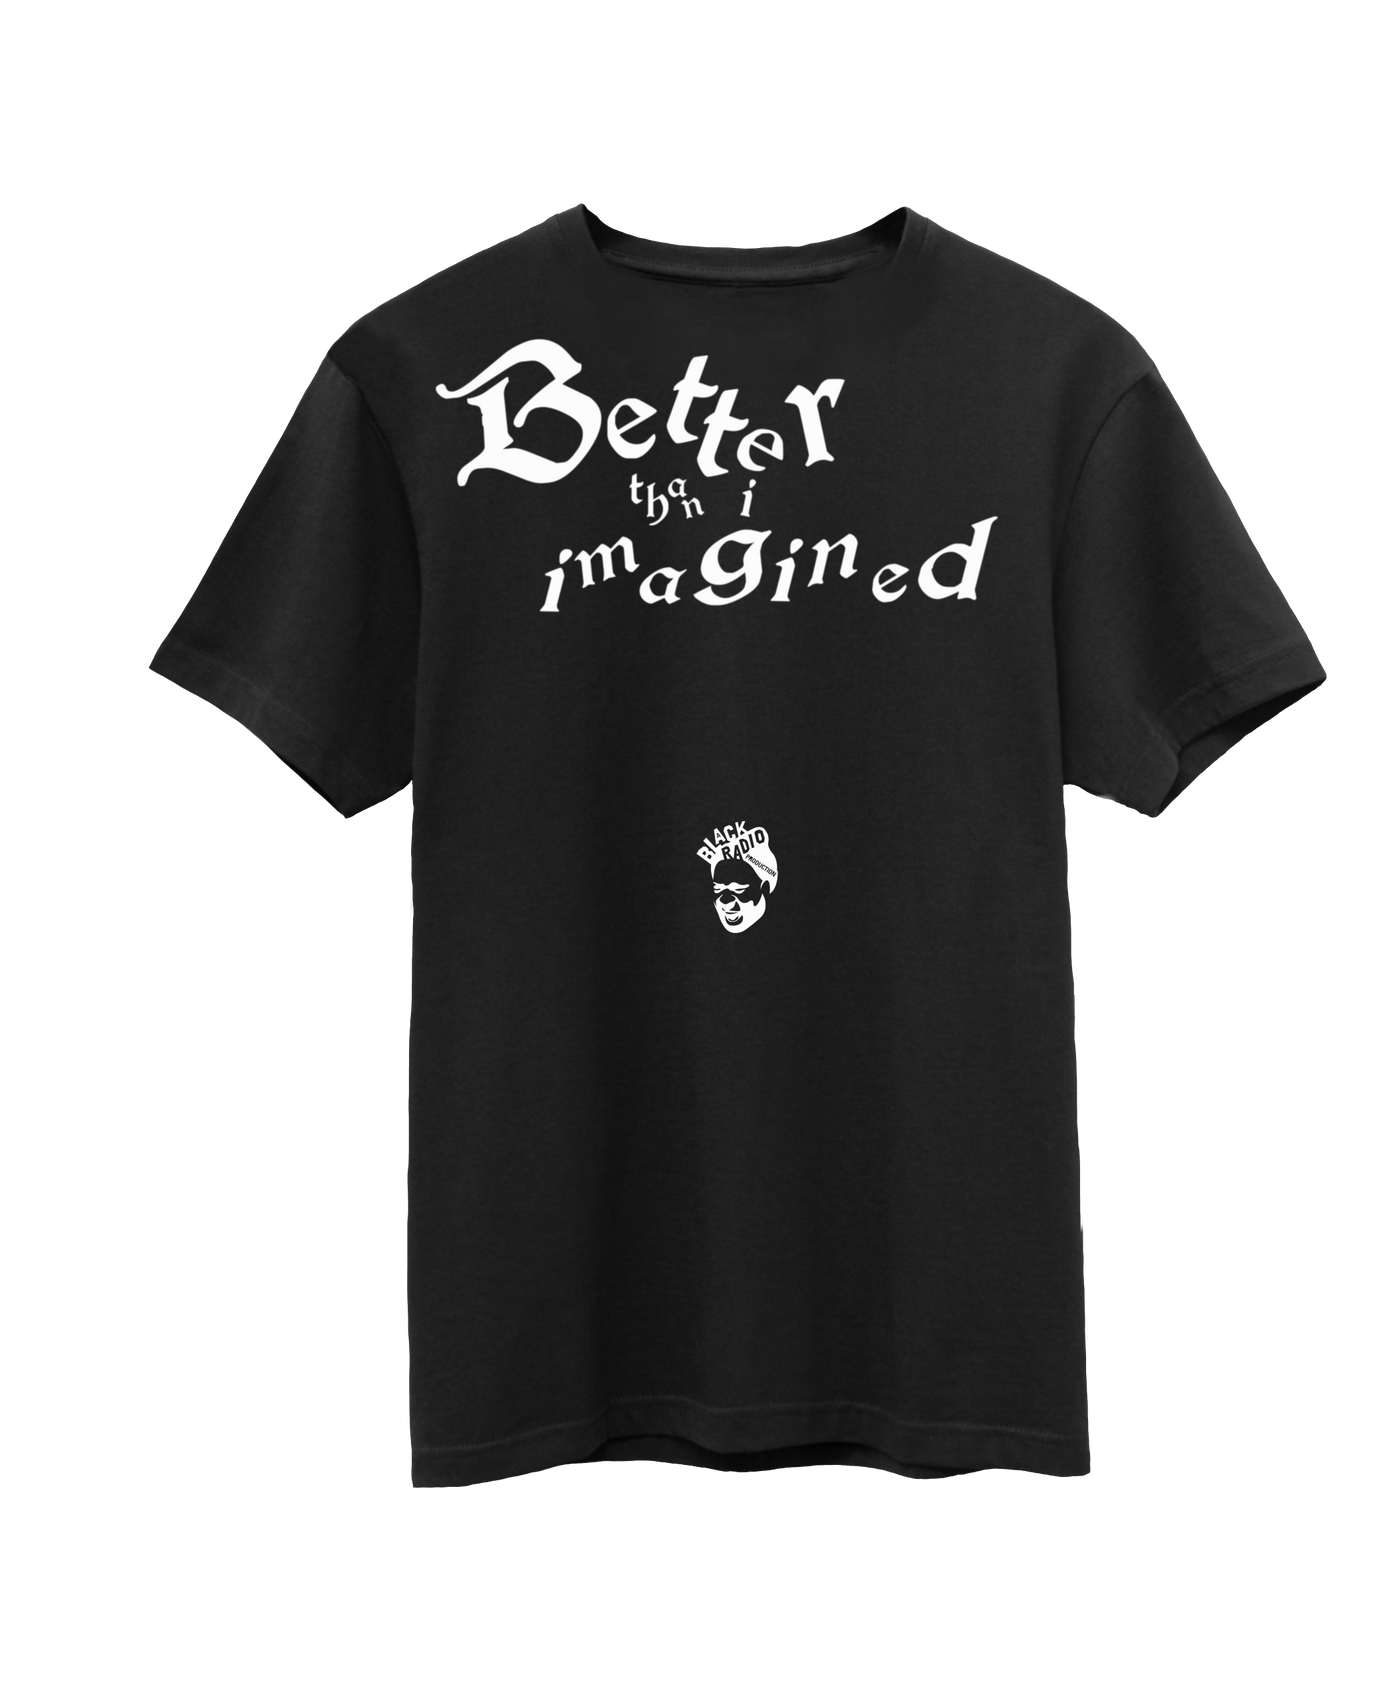 Limited Edition "Better Than I Imagined" T-Shirt